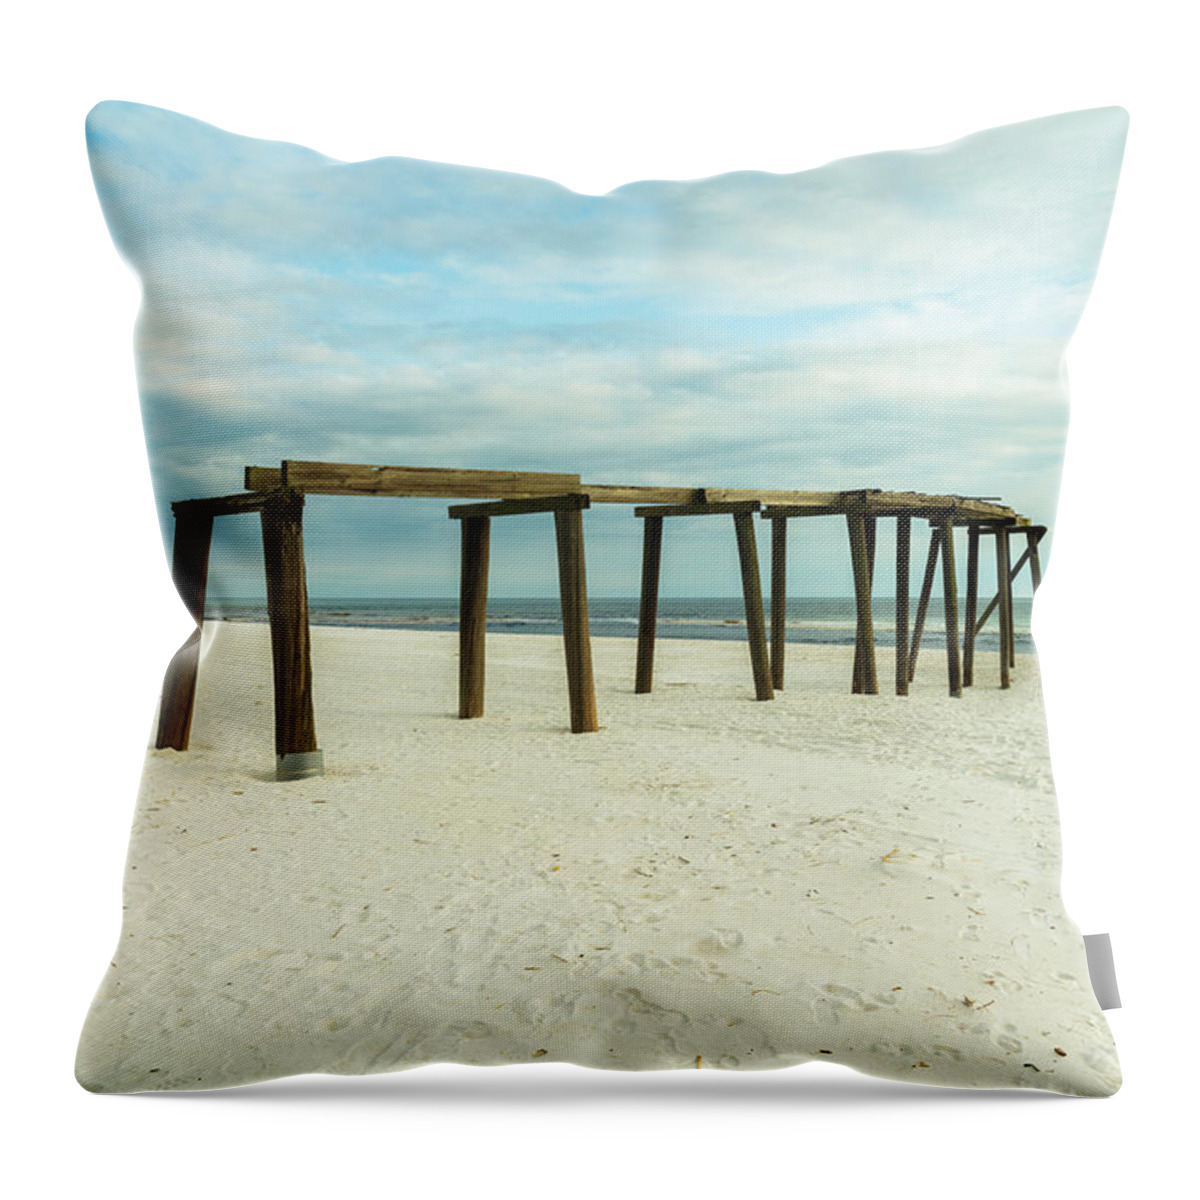 Gulf Of Mexico Throw Pillow featuring the photograph Life of a Pier by Raul Rodriguez